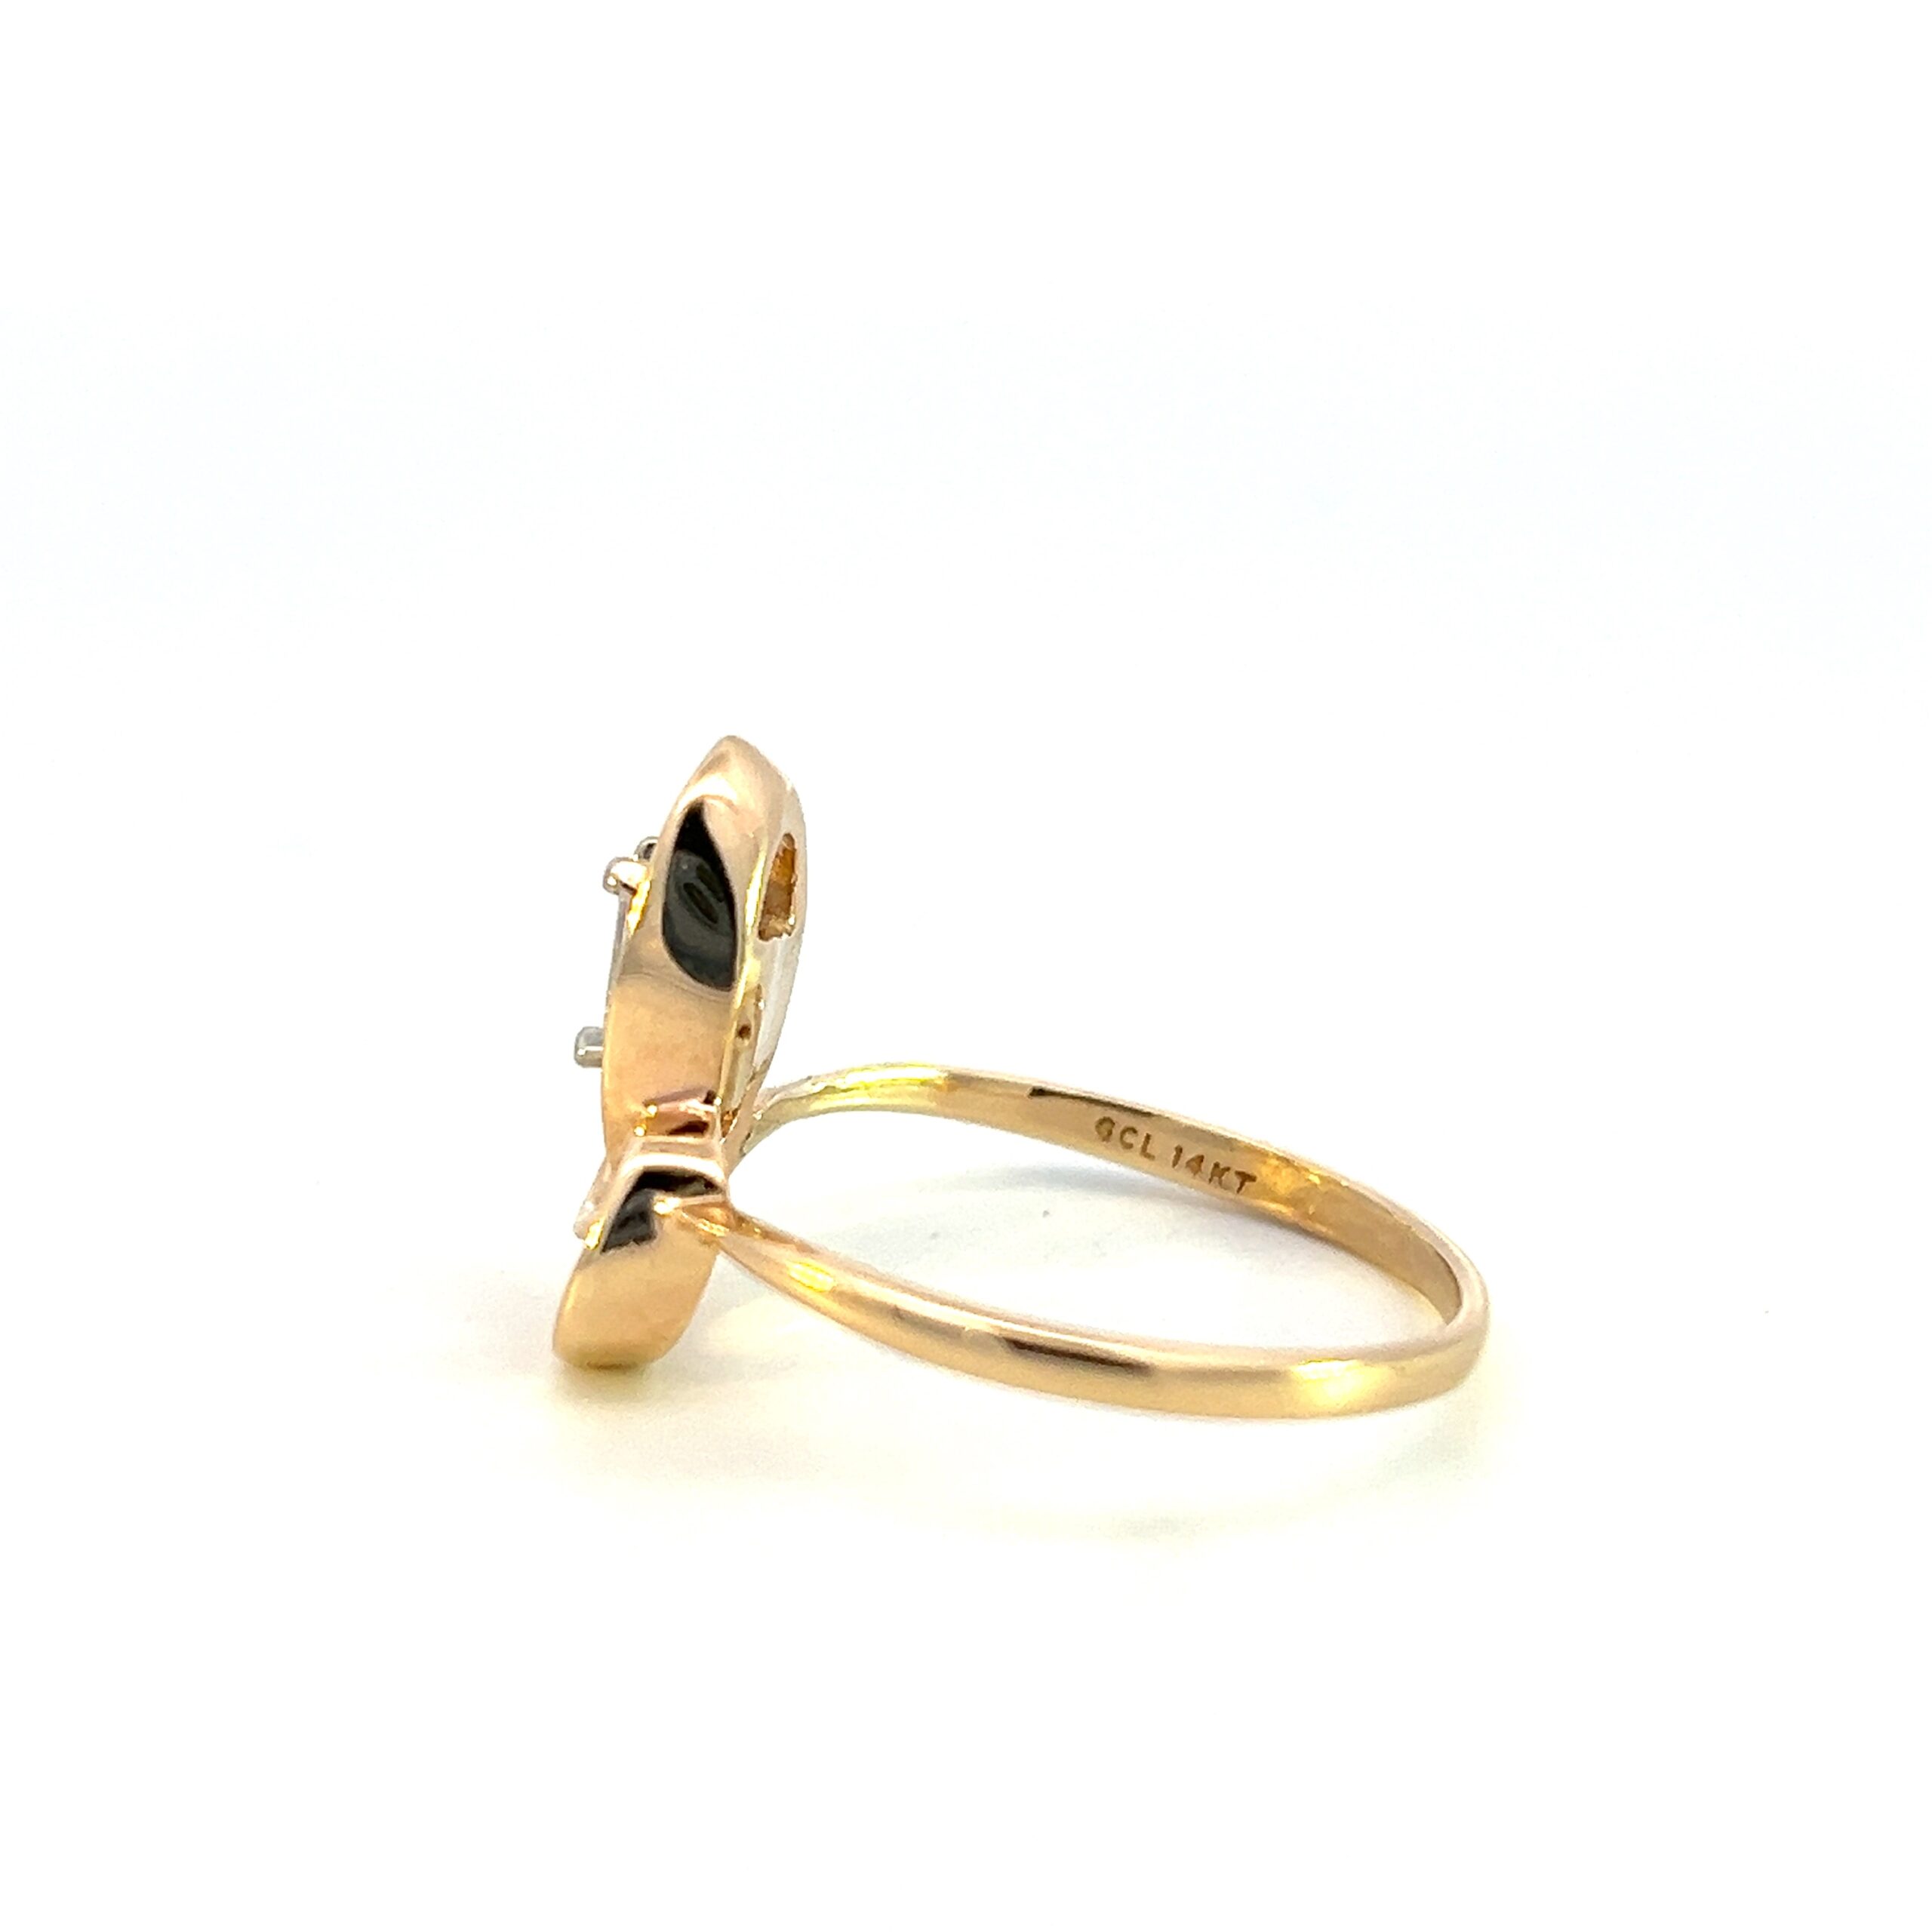 One estate 14 karat yellow gold abstract diamond ring from the 1980s containing an emerald-cut diamond weighing 0.26 carat total weight in an asymmetrical open-loop design.